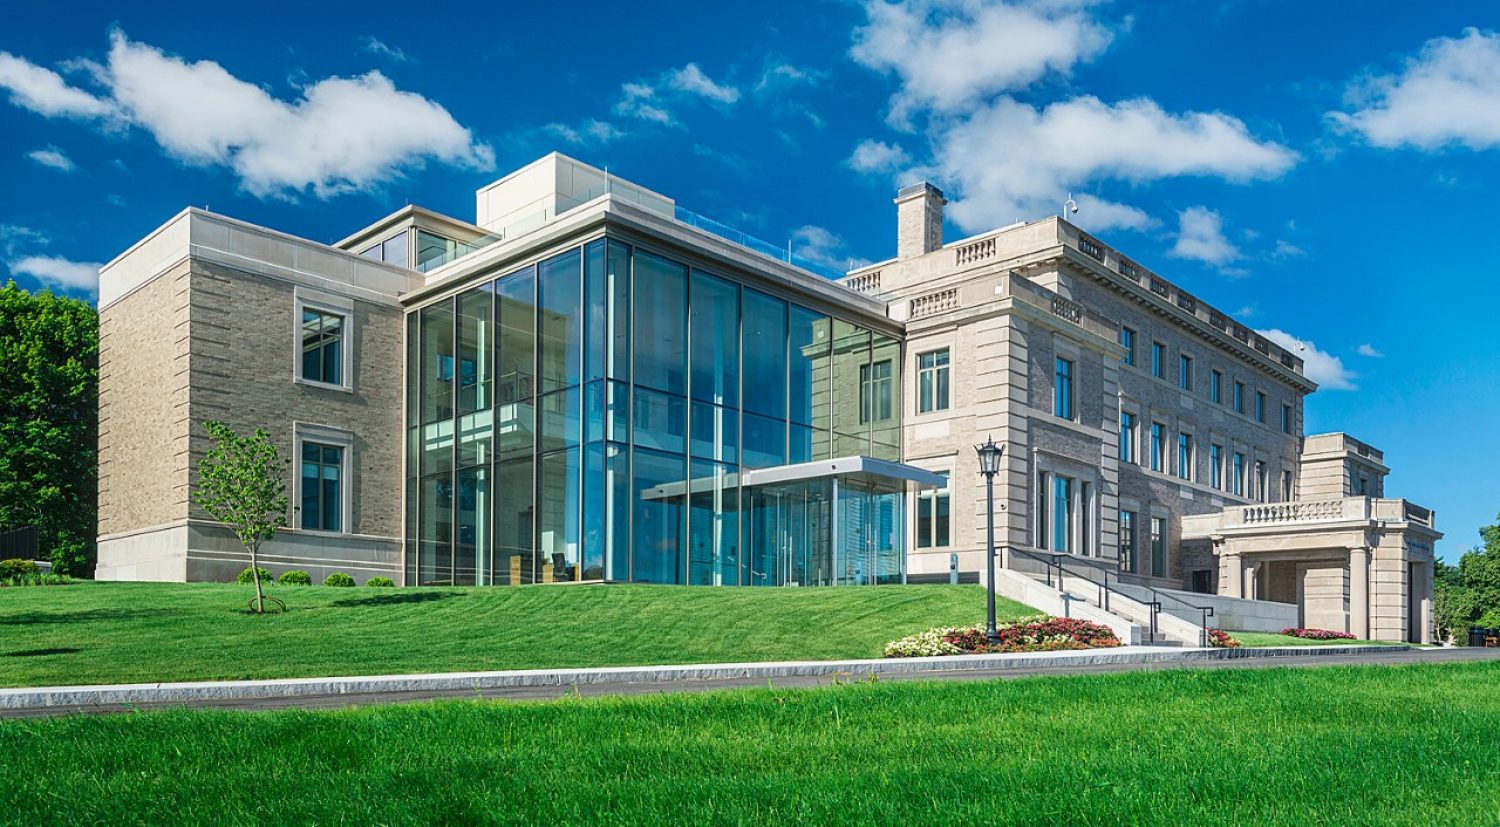 The McMullen Museum of Art at Boston College